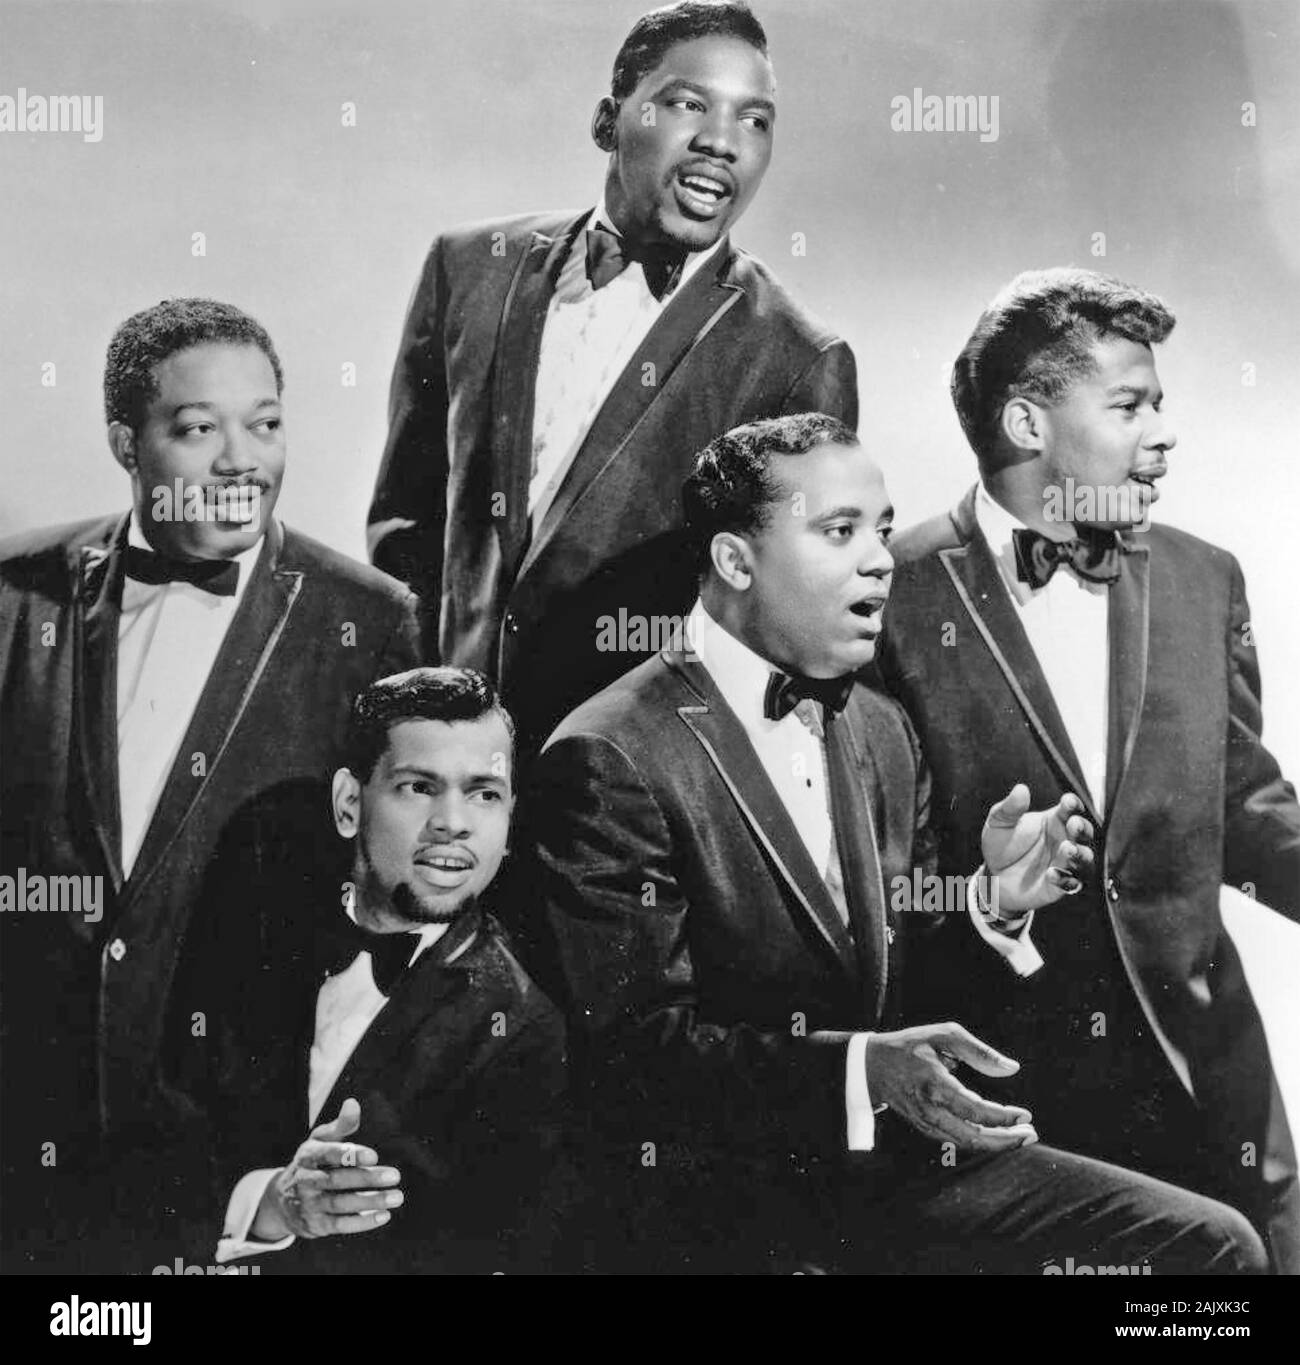 THE DRIFTERS Promotional photo of American vocal group about  1965 Stock Photo